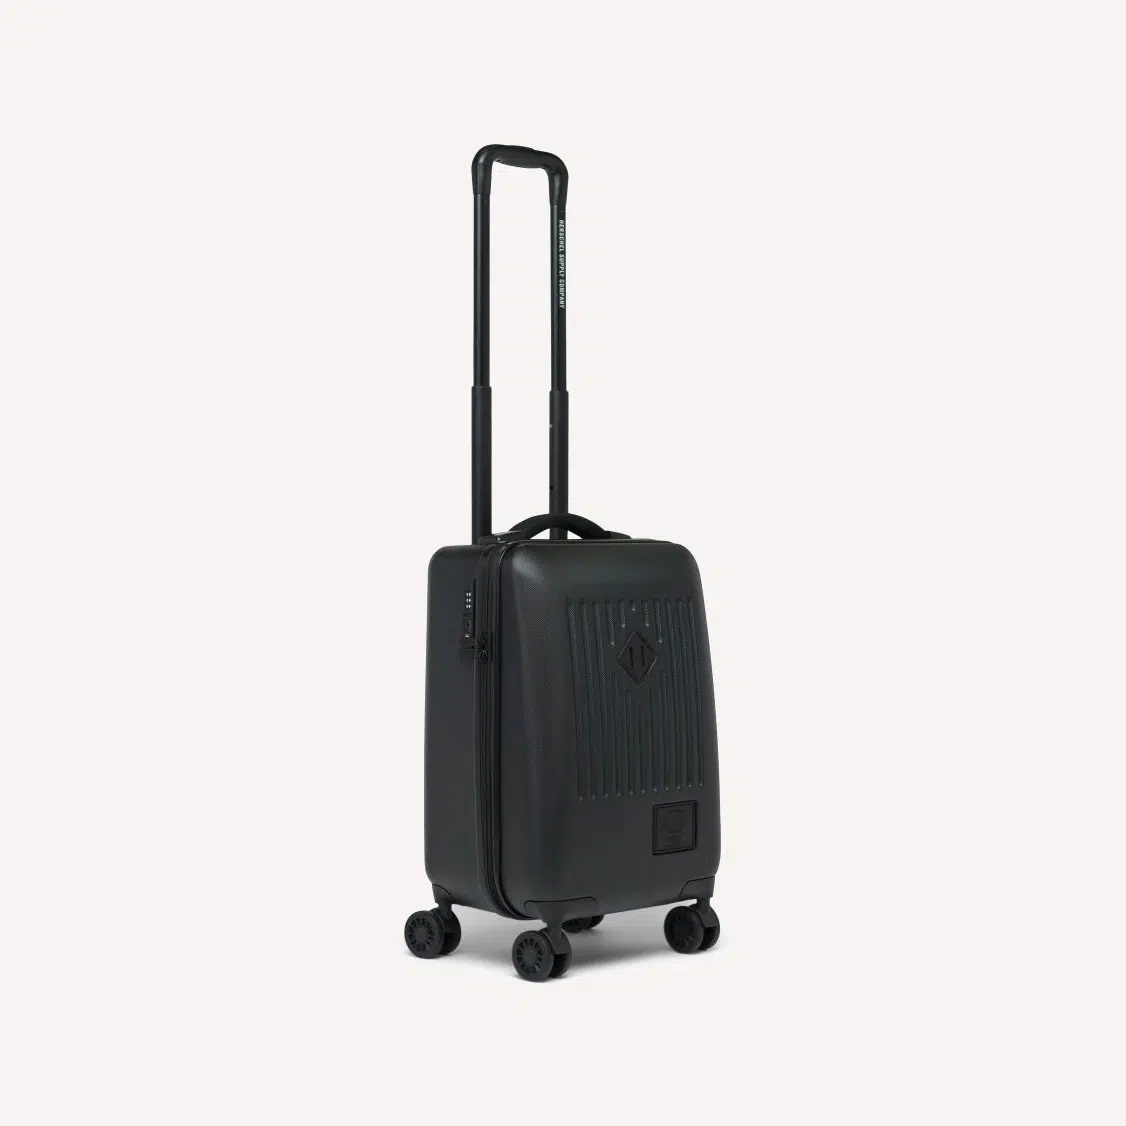 Herschel Trade Luggage Carry On